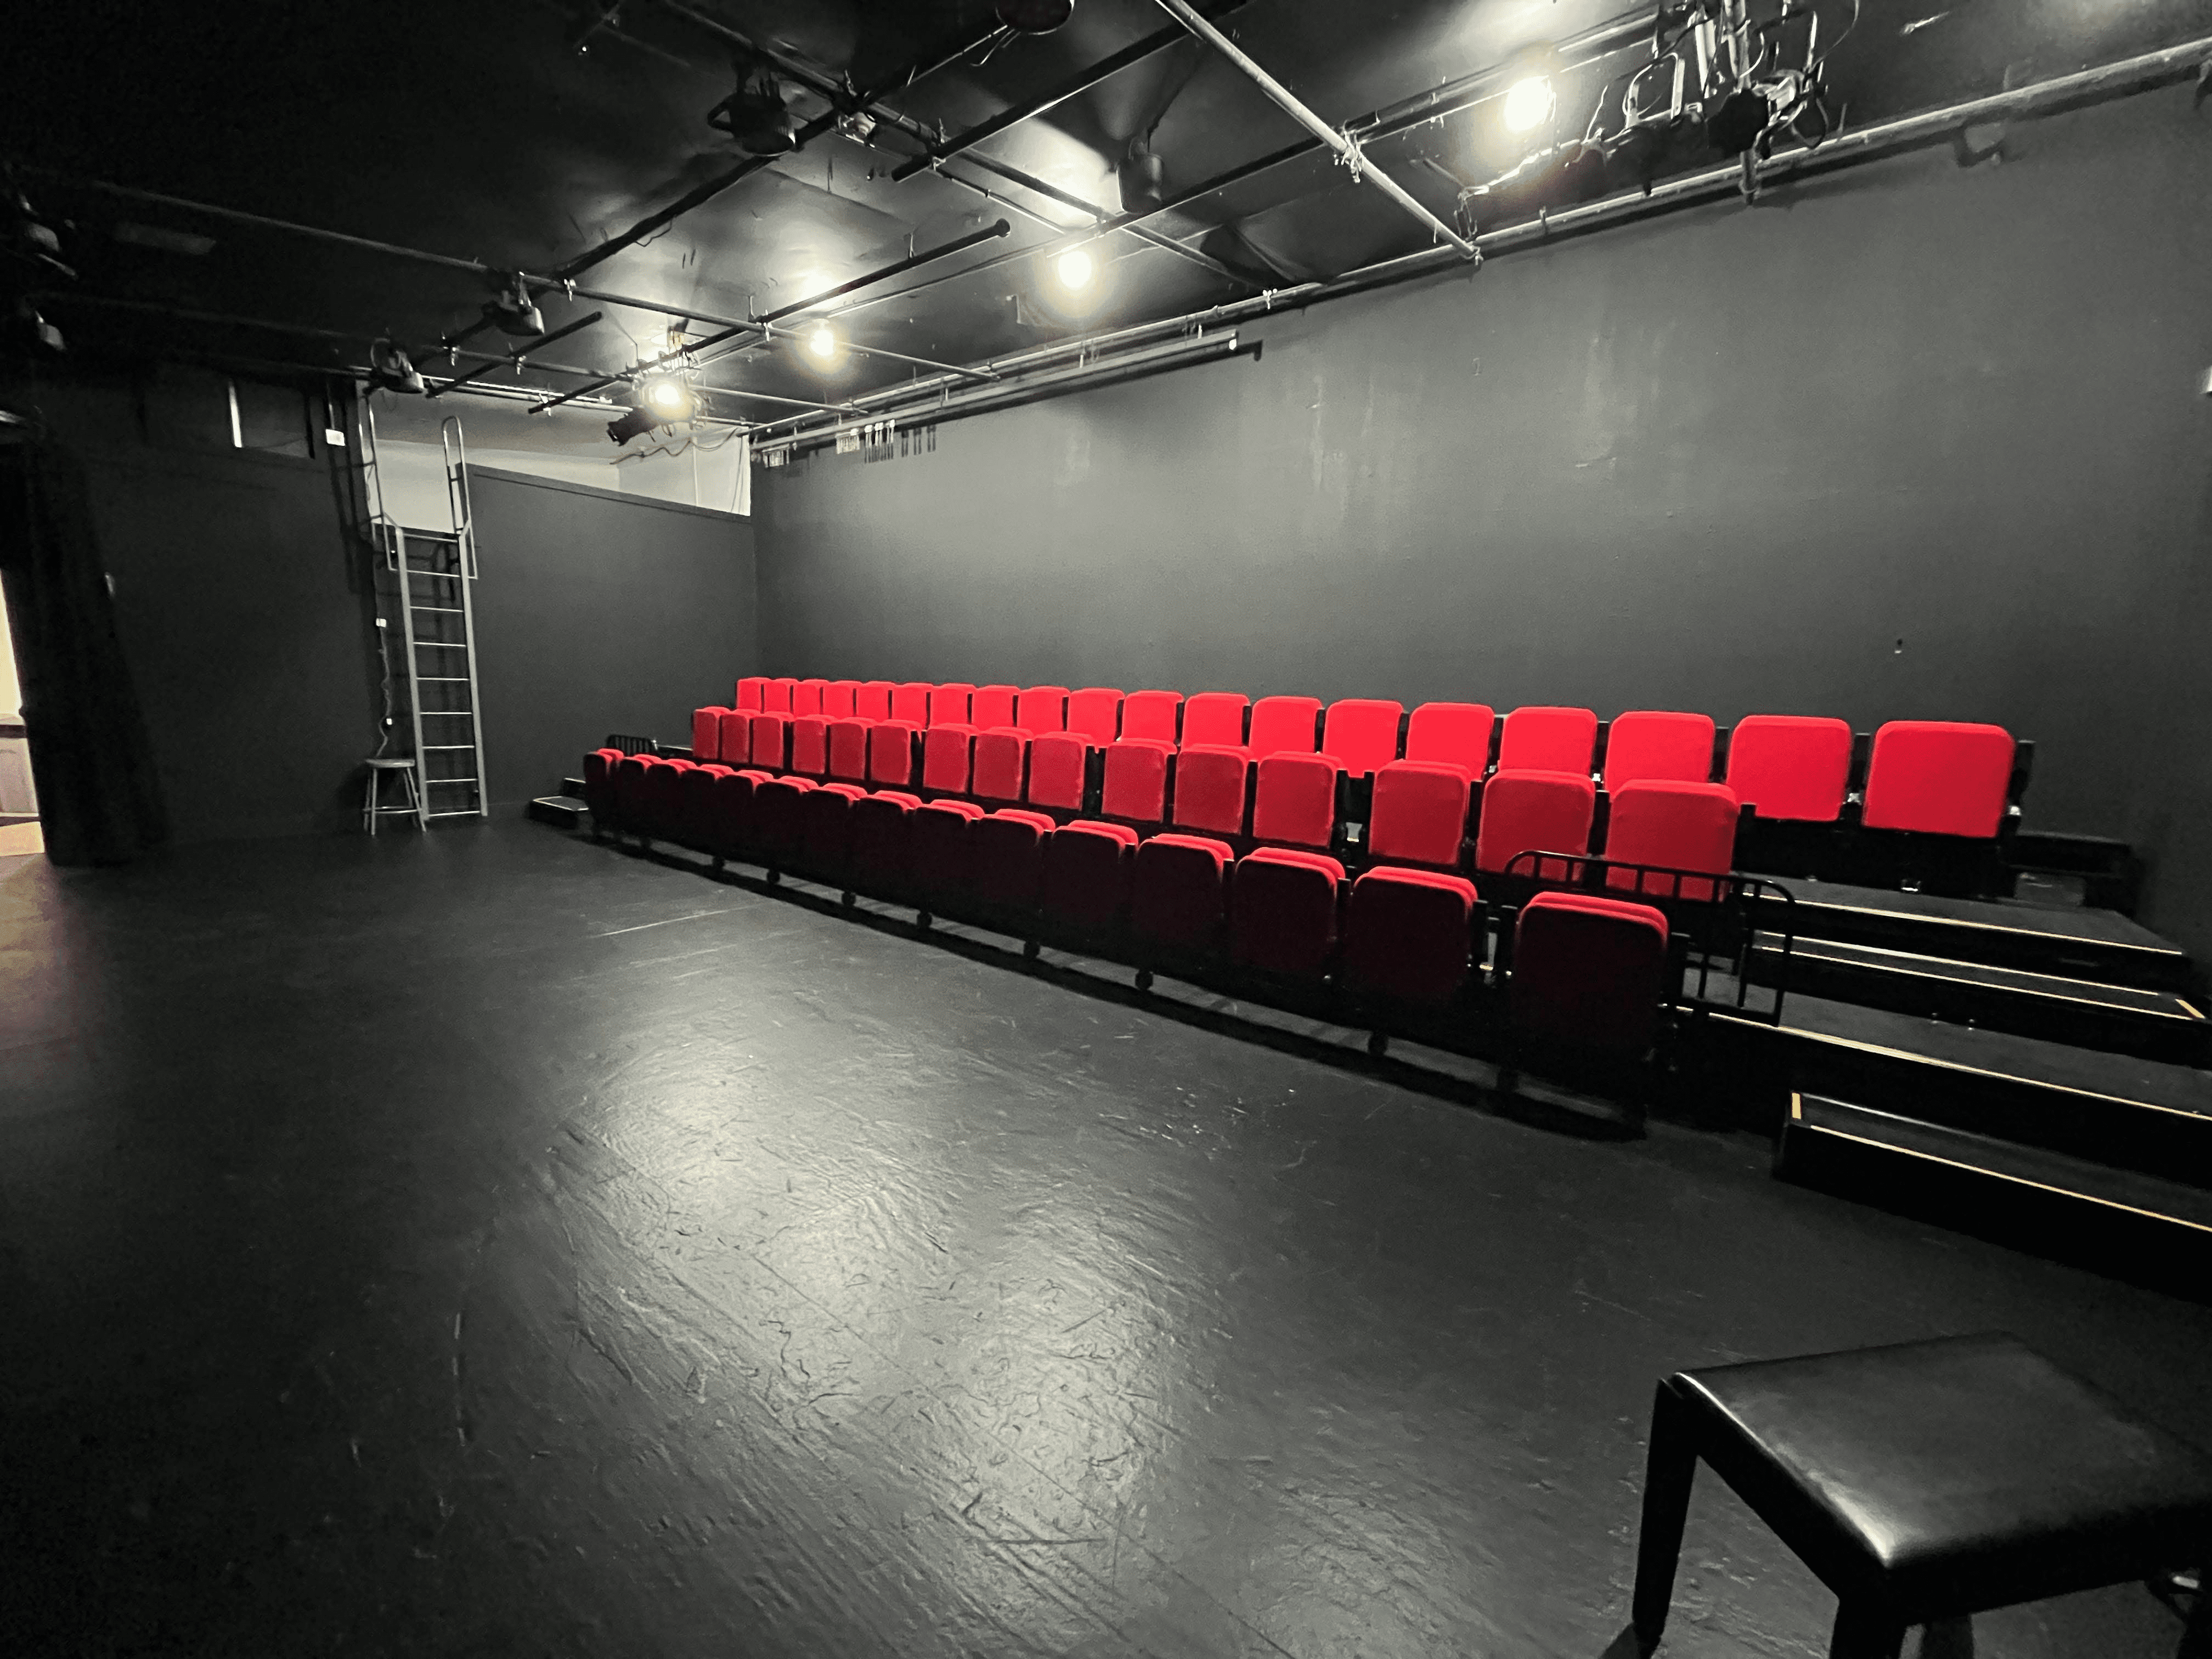 The Red Seats at the Madnani Theater for the Community, located in Hollywood